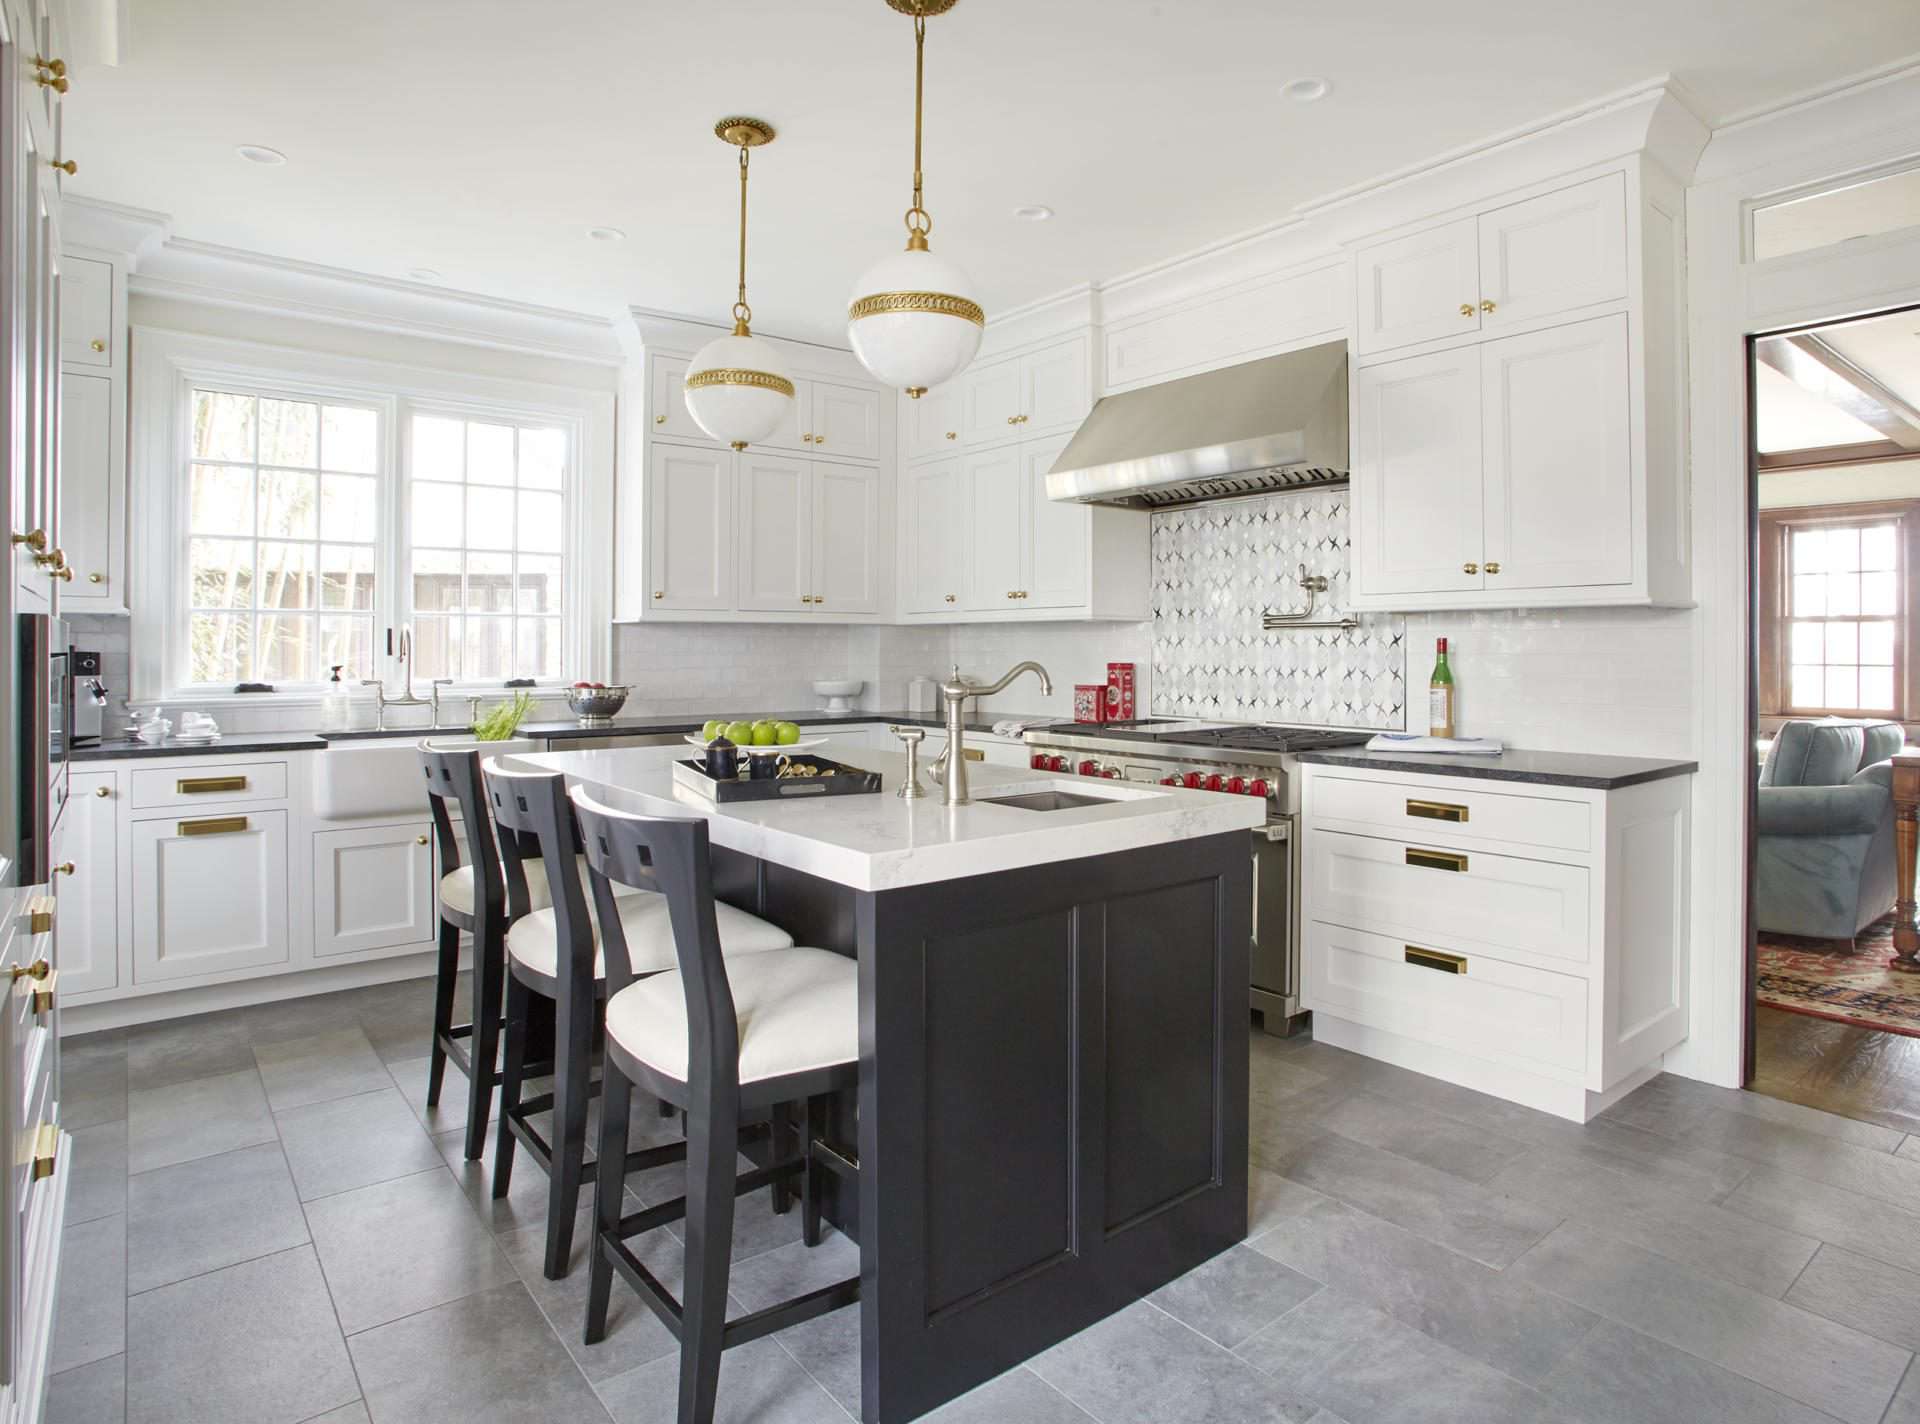 Classic White and Black Painted Kitchen with two sinks.